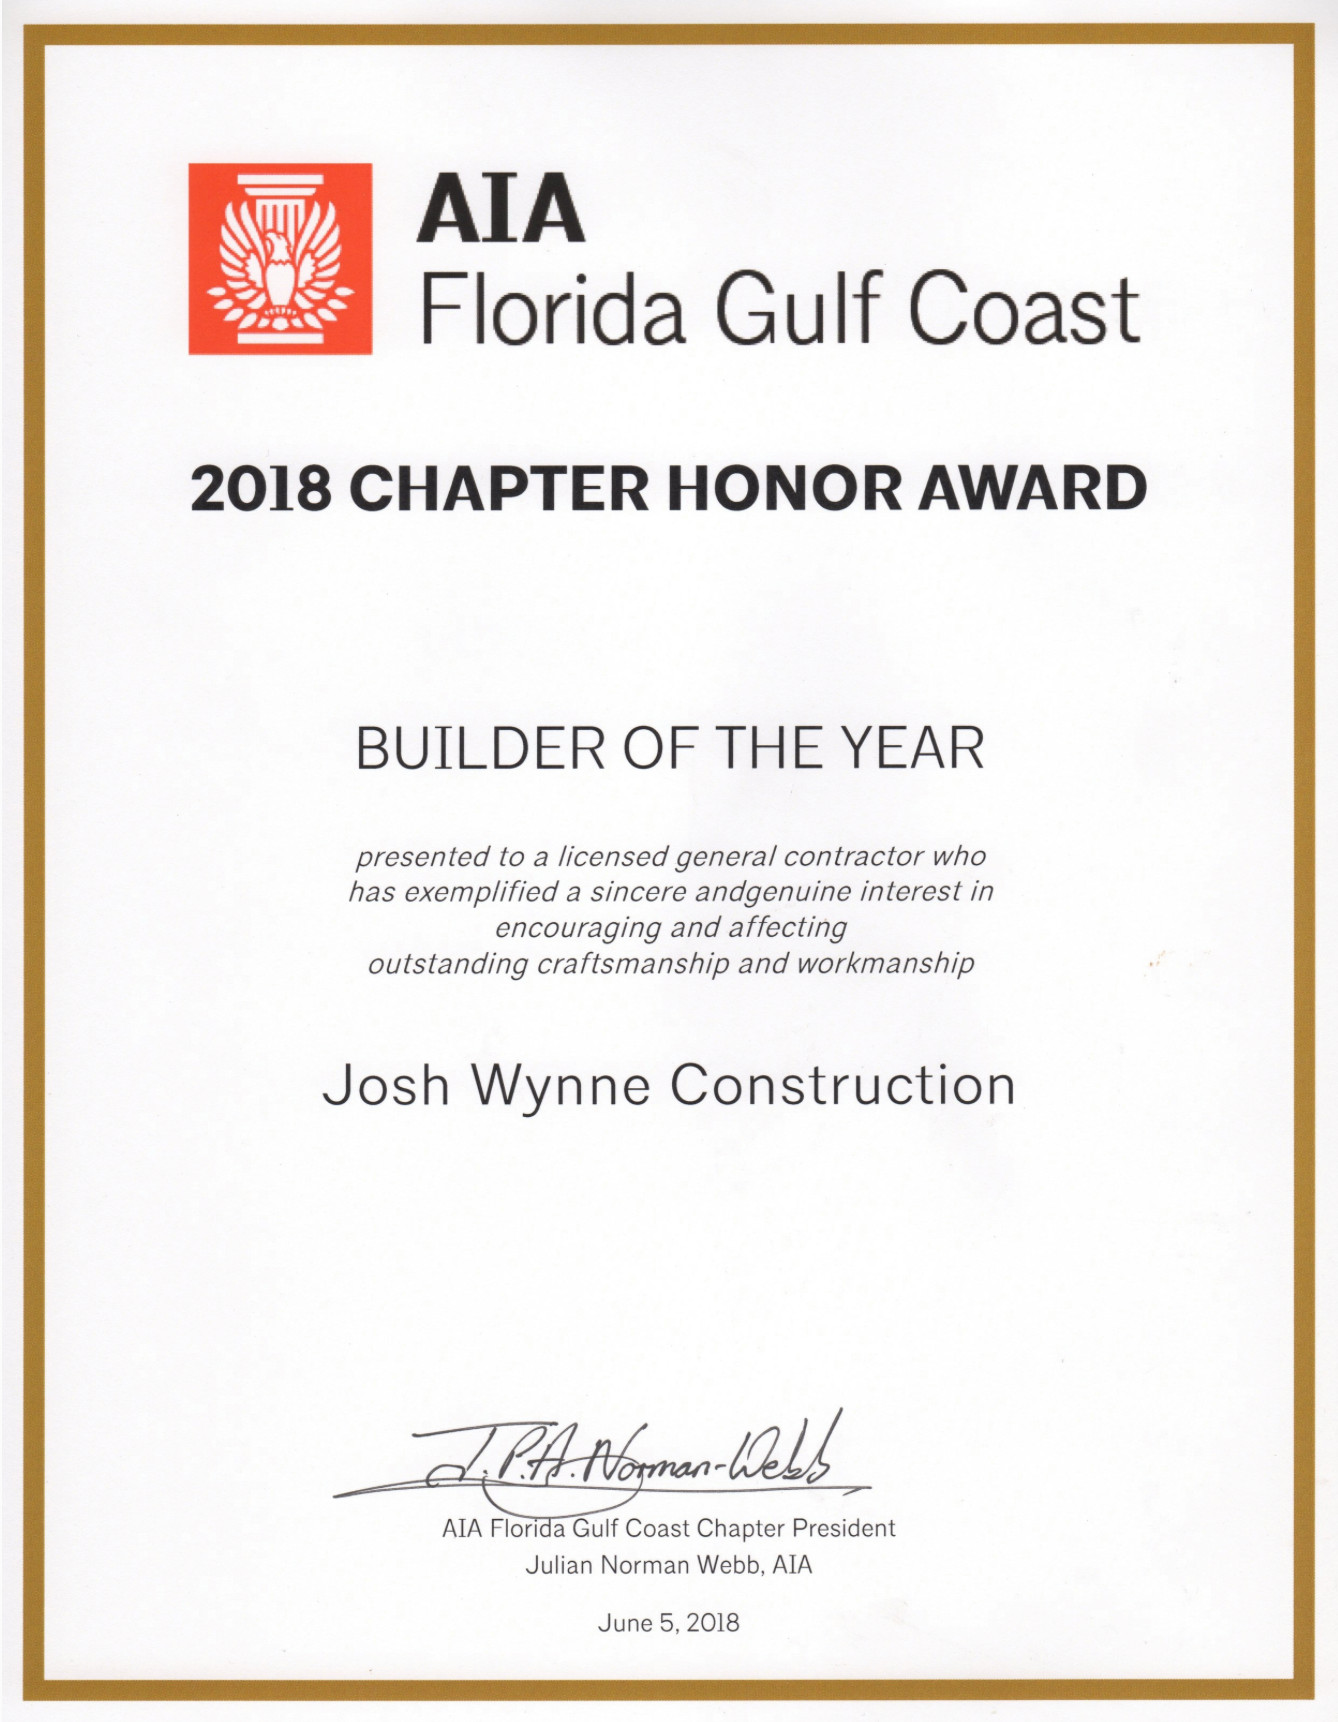 AIA Builder of the Year